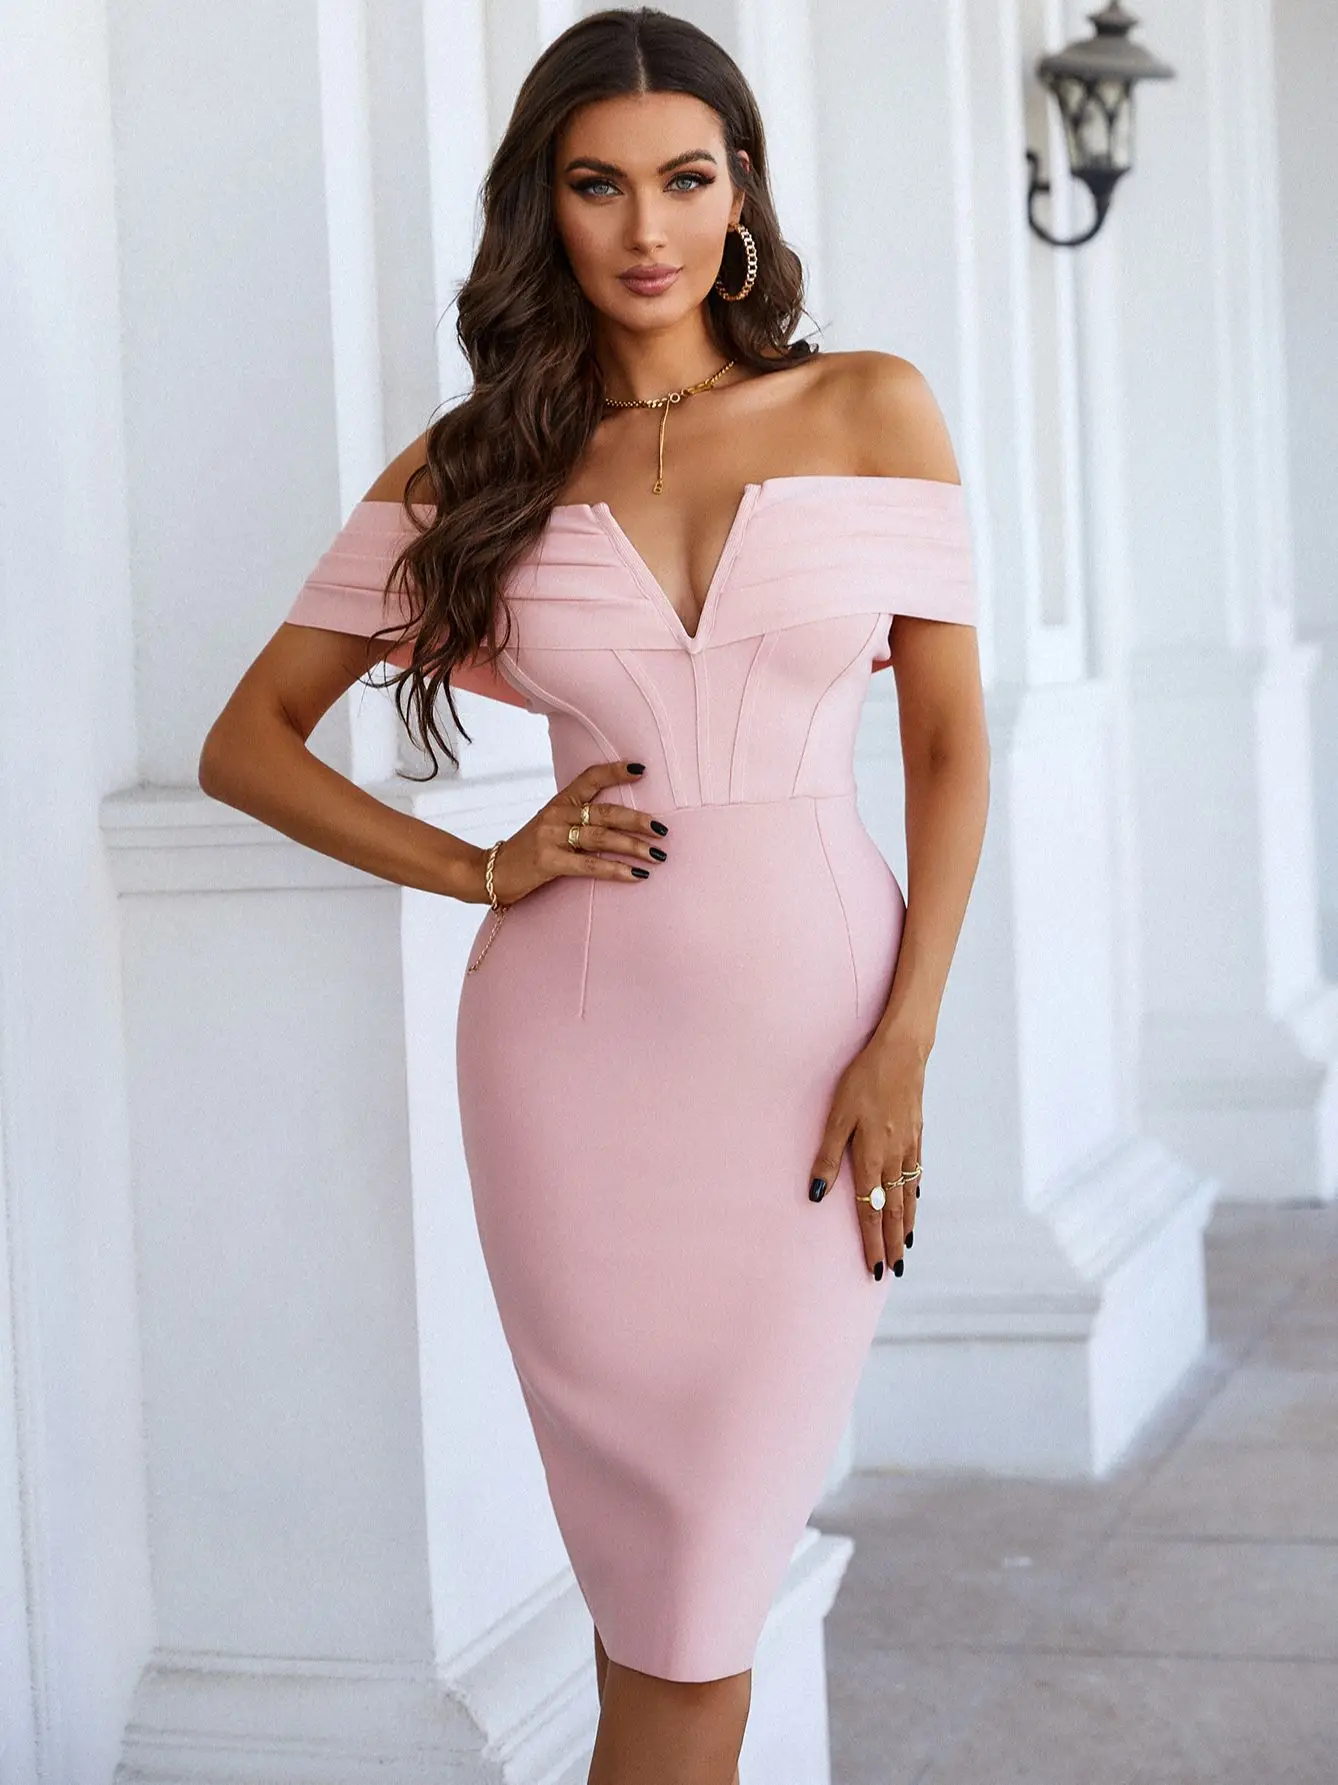 New Fashion Sexy Off the Shoulder Pink Bandage Dress 2022 Women Chic Midi Evening Celebrity Bodycon Dress